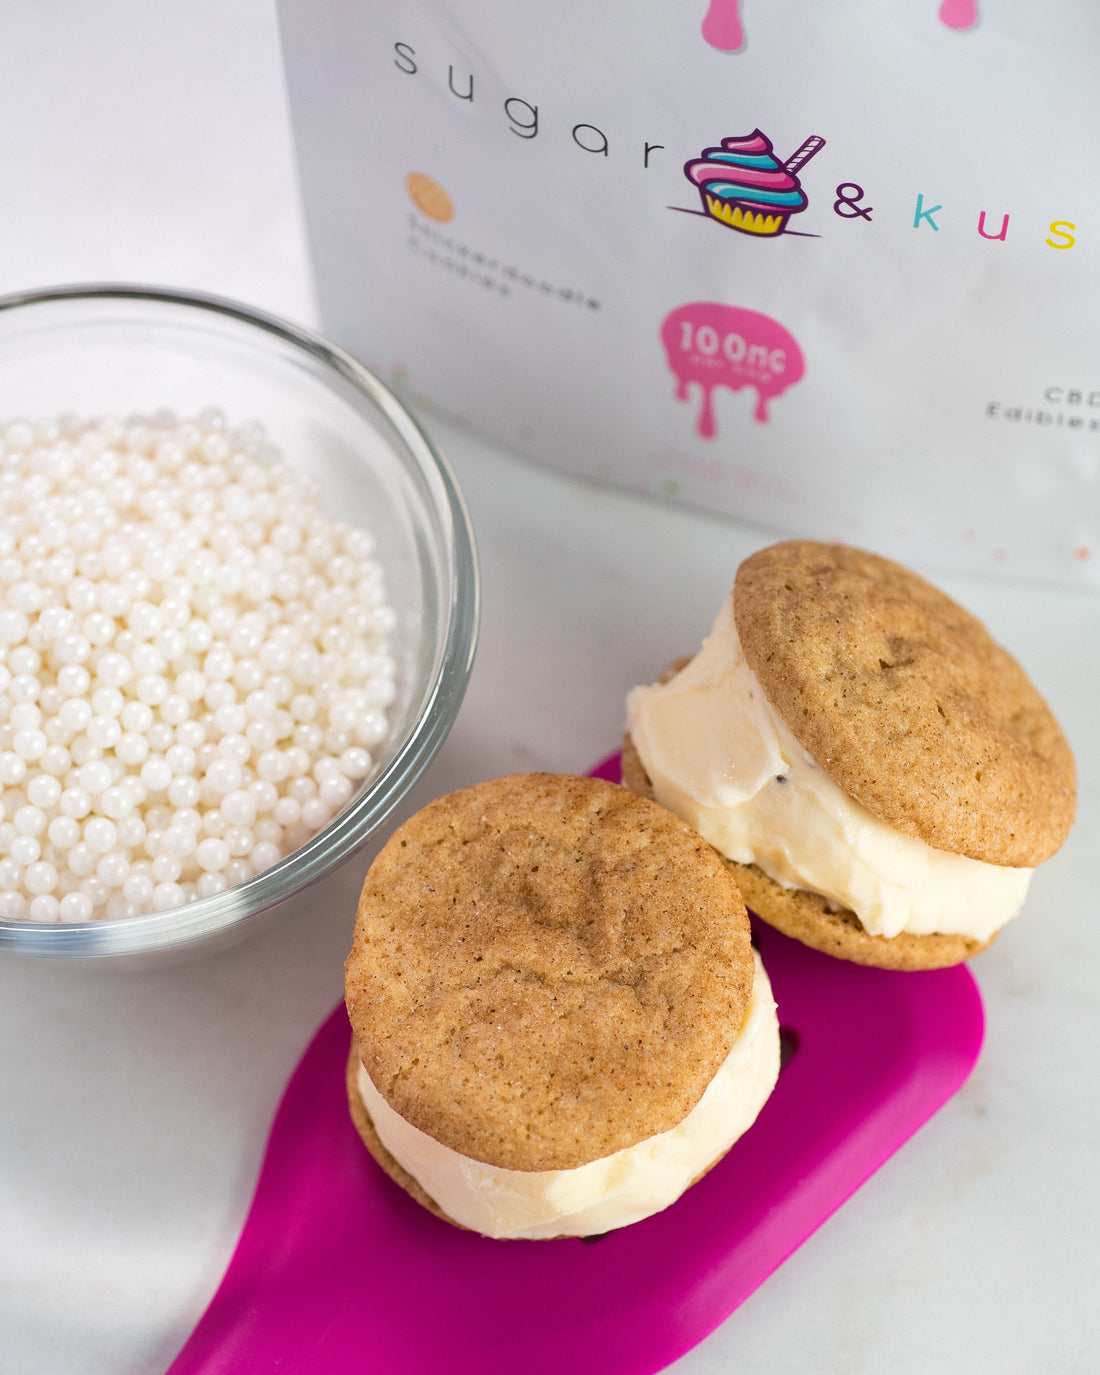 Looking for a sweet CBD recipe? This recipe is easy to make and helps you to get the maximum benefits of CBD by adding Vanilla CBD Oil to our Snickerdoodle CBD Cookies with a touch of ice cream to cool off on a hot day!